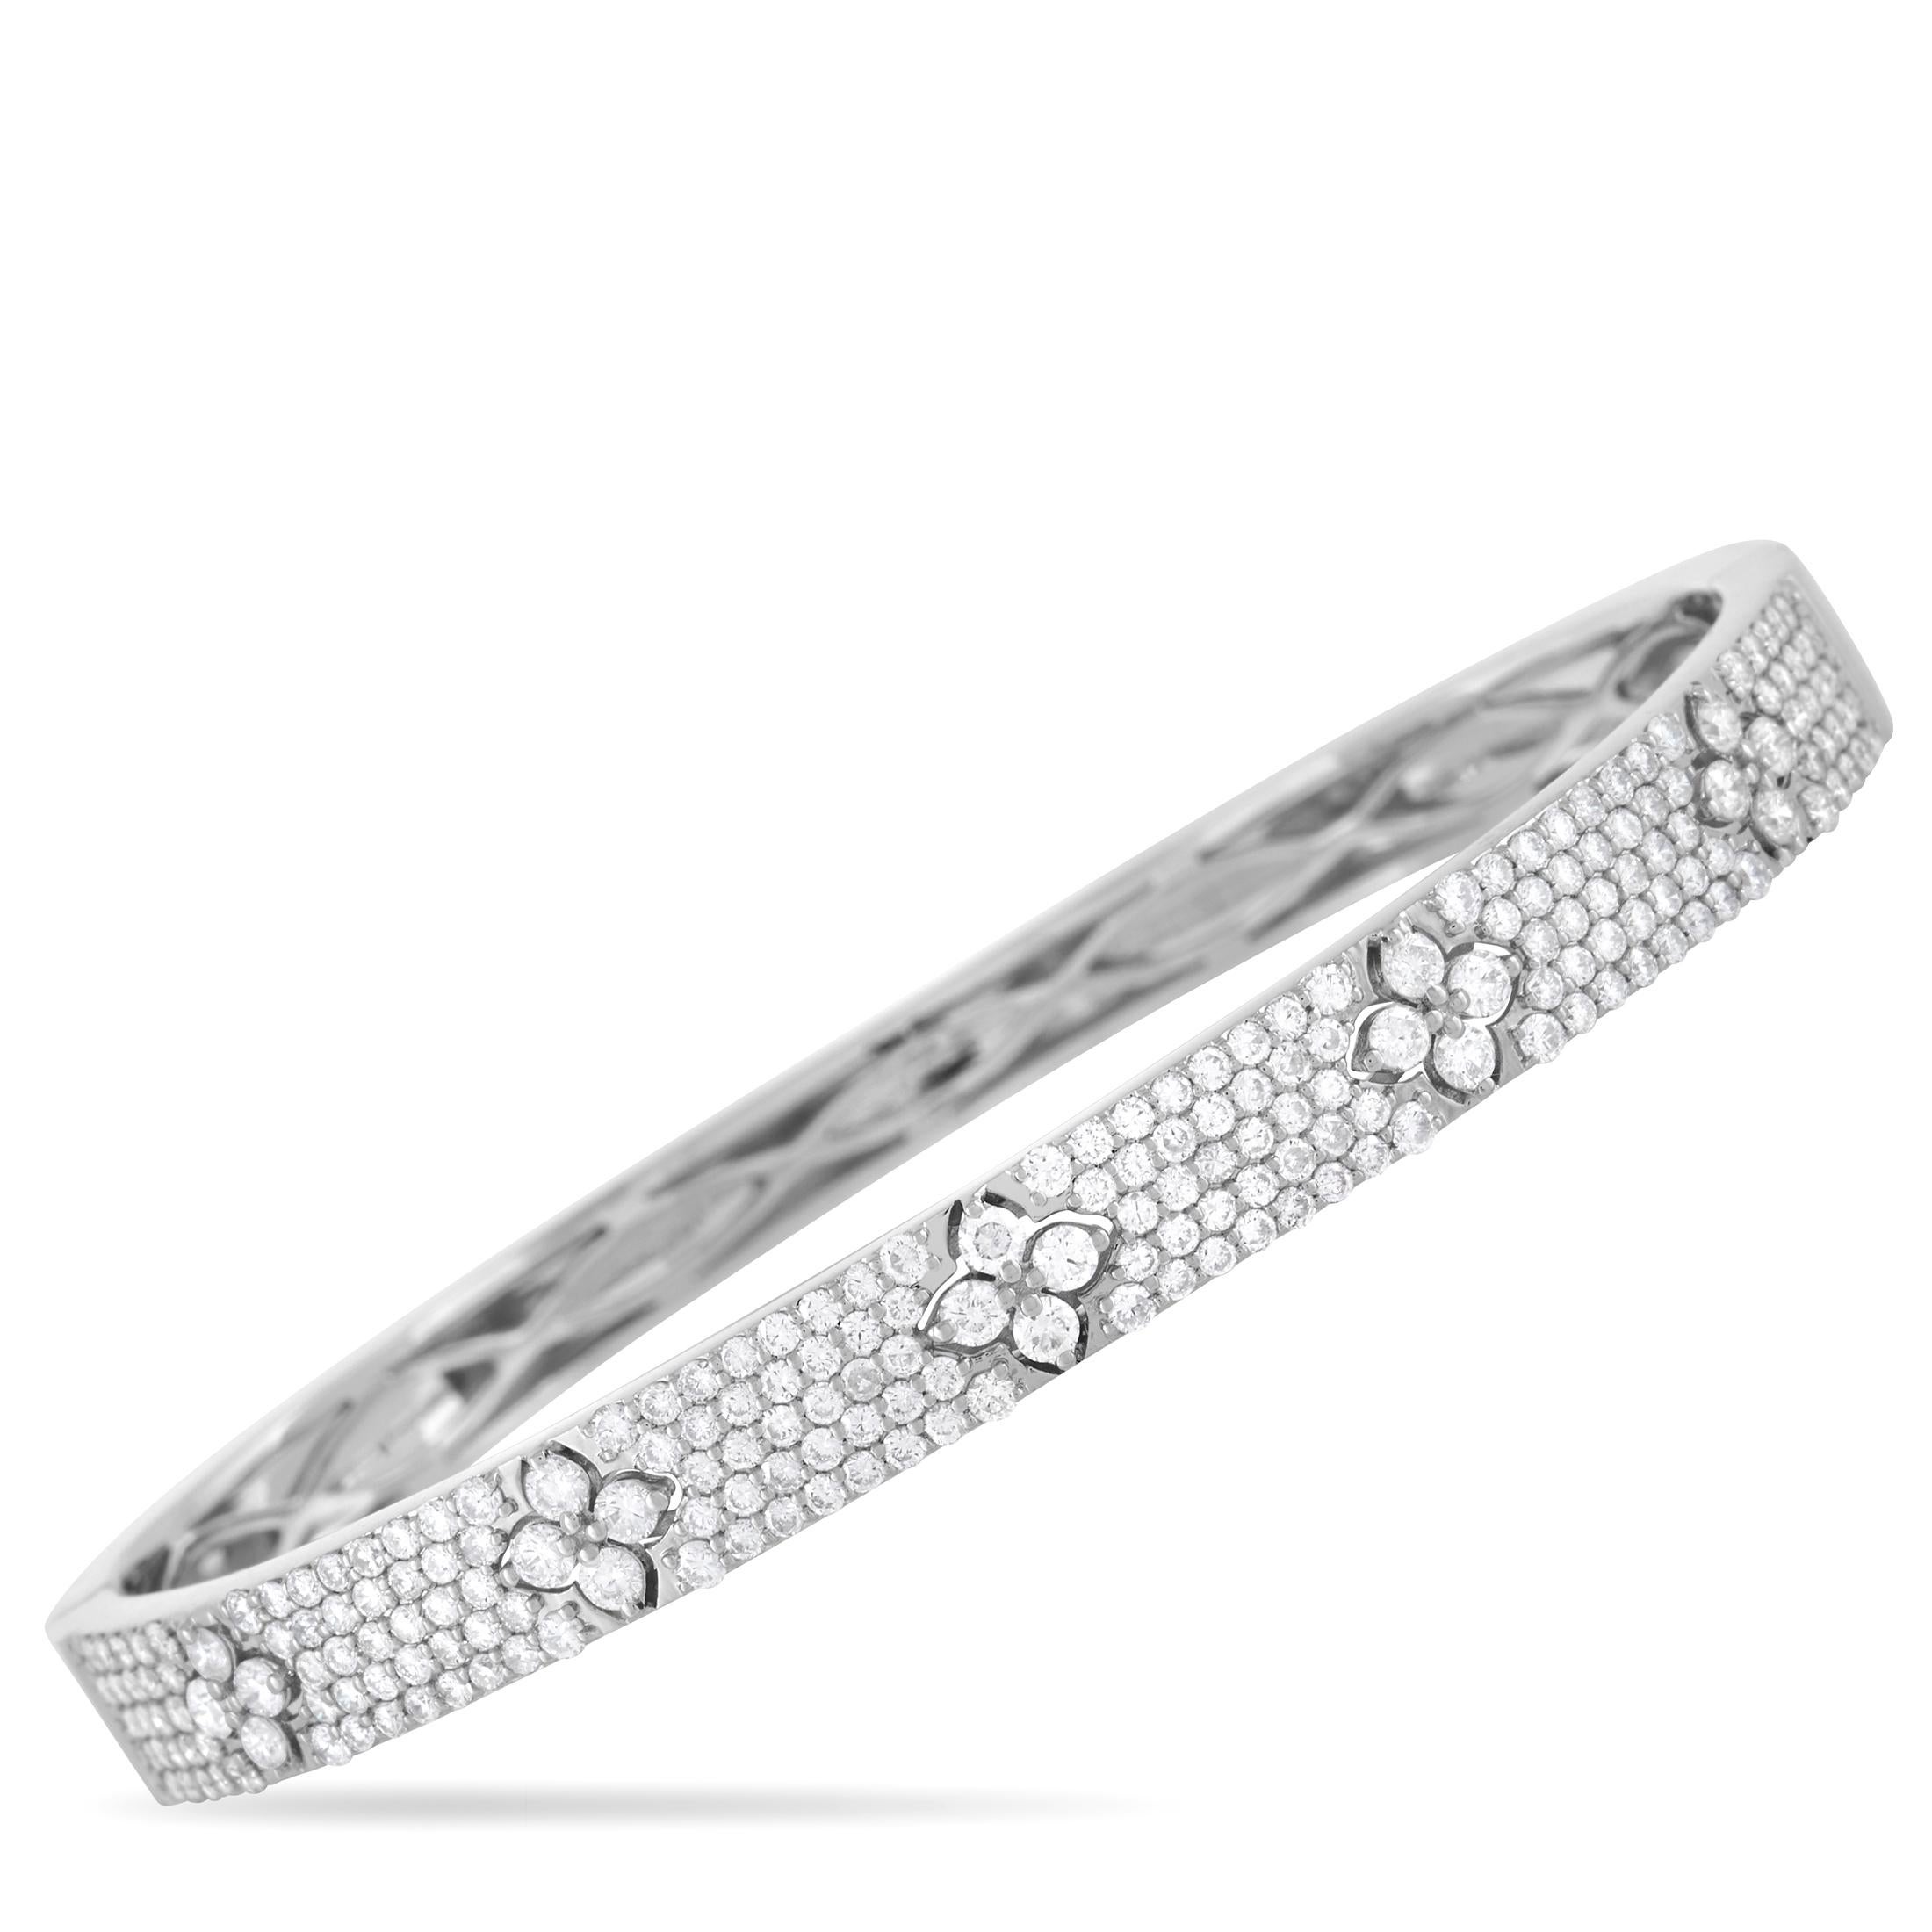 LB Exclusive 18K White Gold 2.42 Ct Diamond Bracelet In New Condition For Sale In Southampton, PA